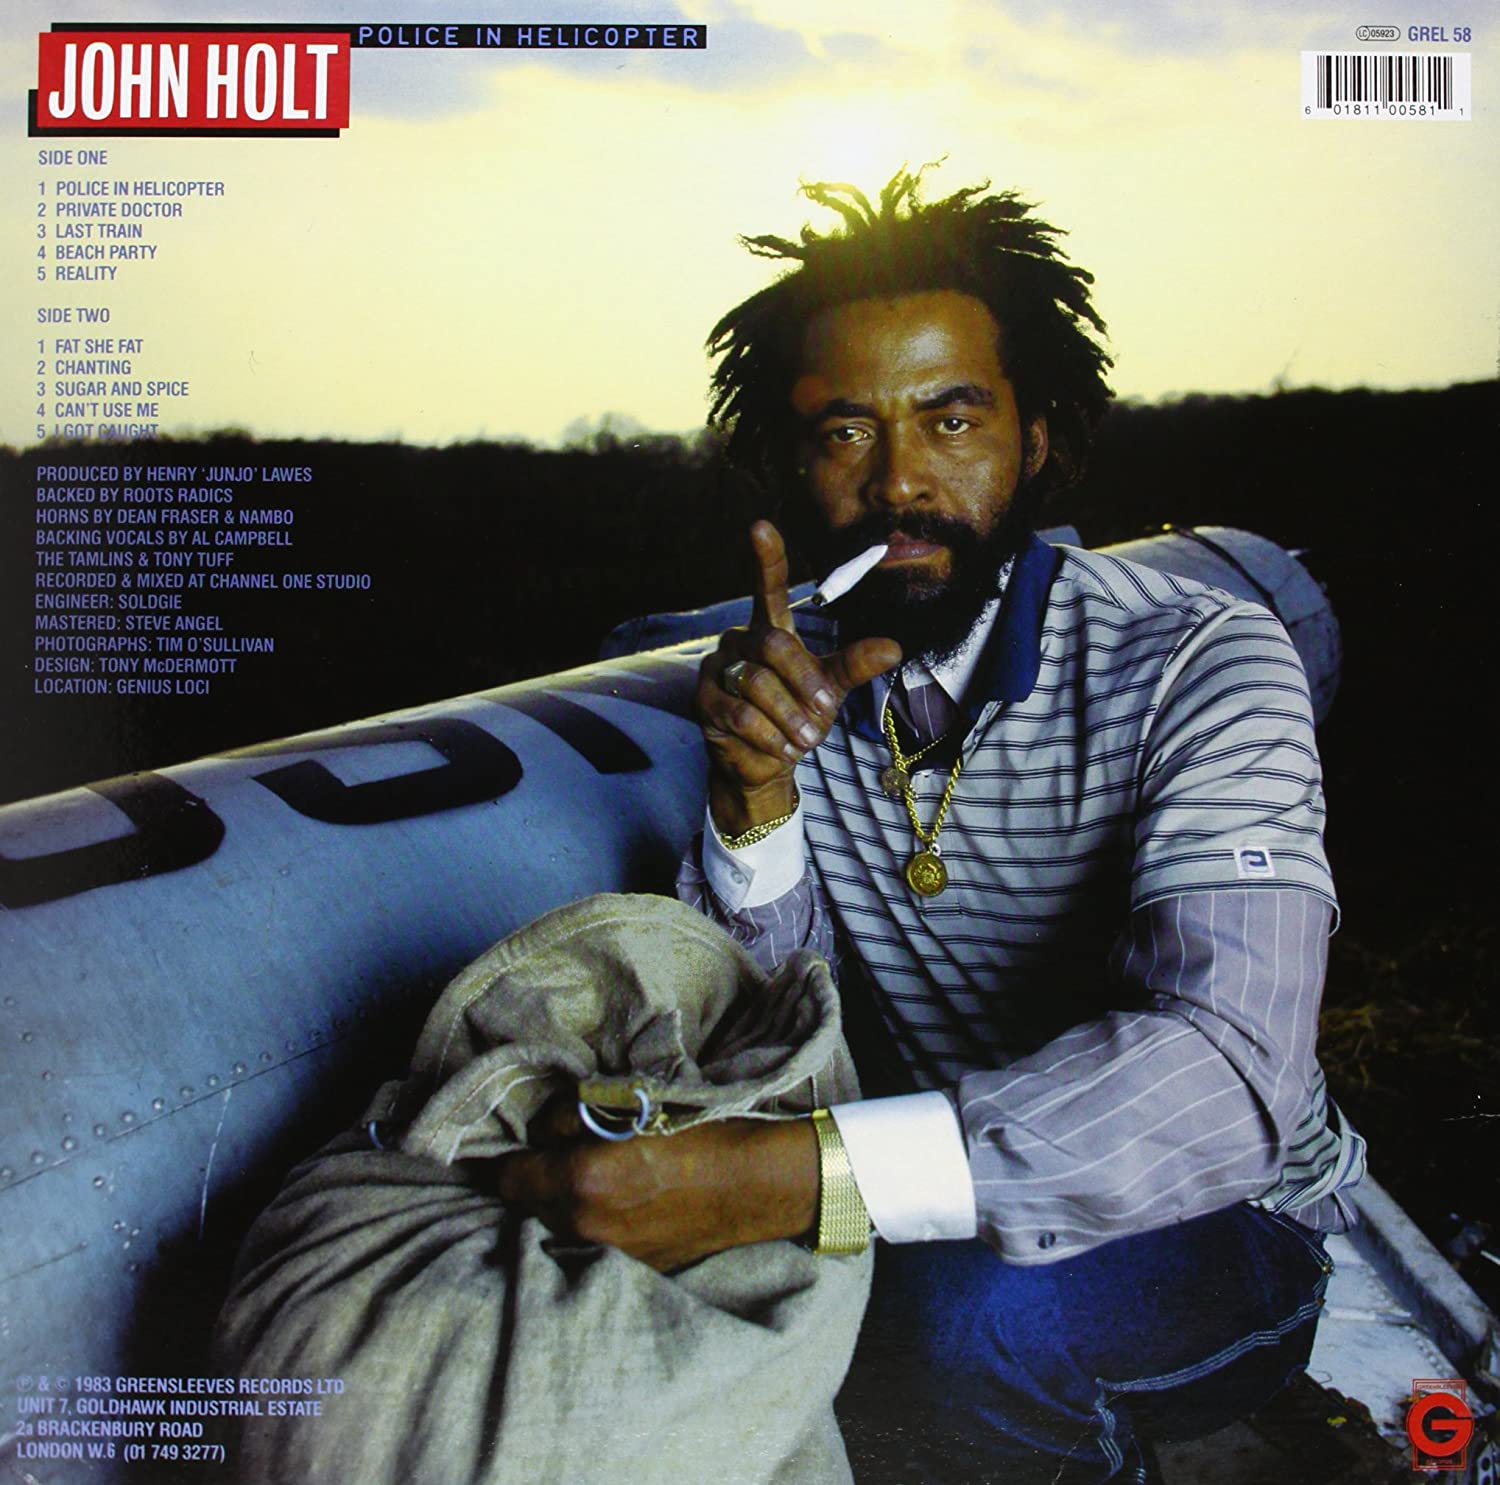 John Holt (존 홀트) - Police In Helicopter [LP]